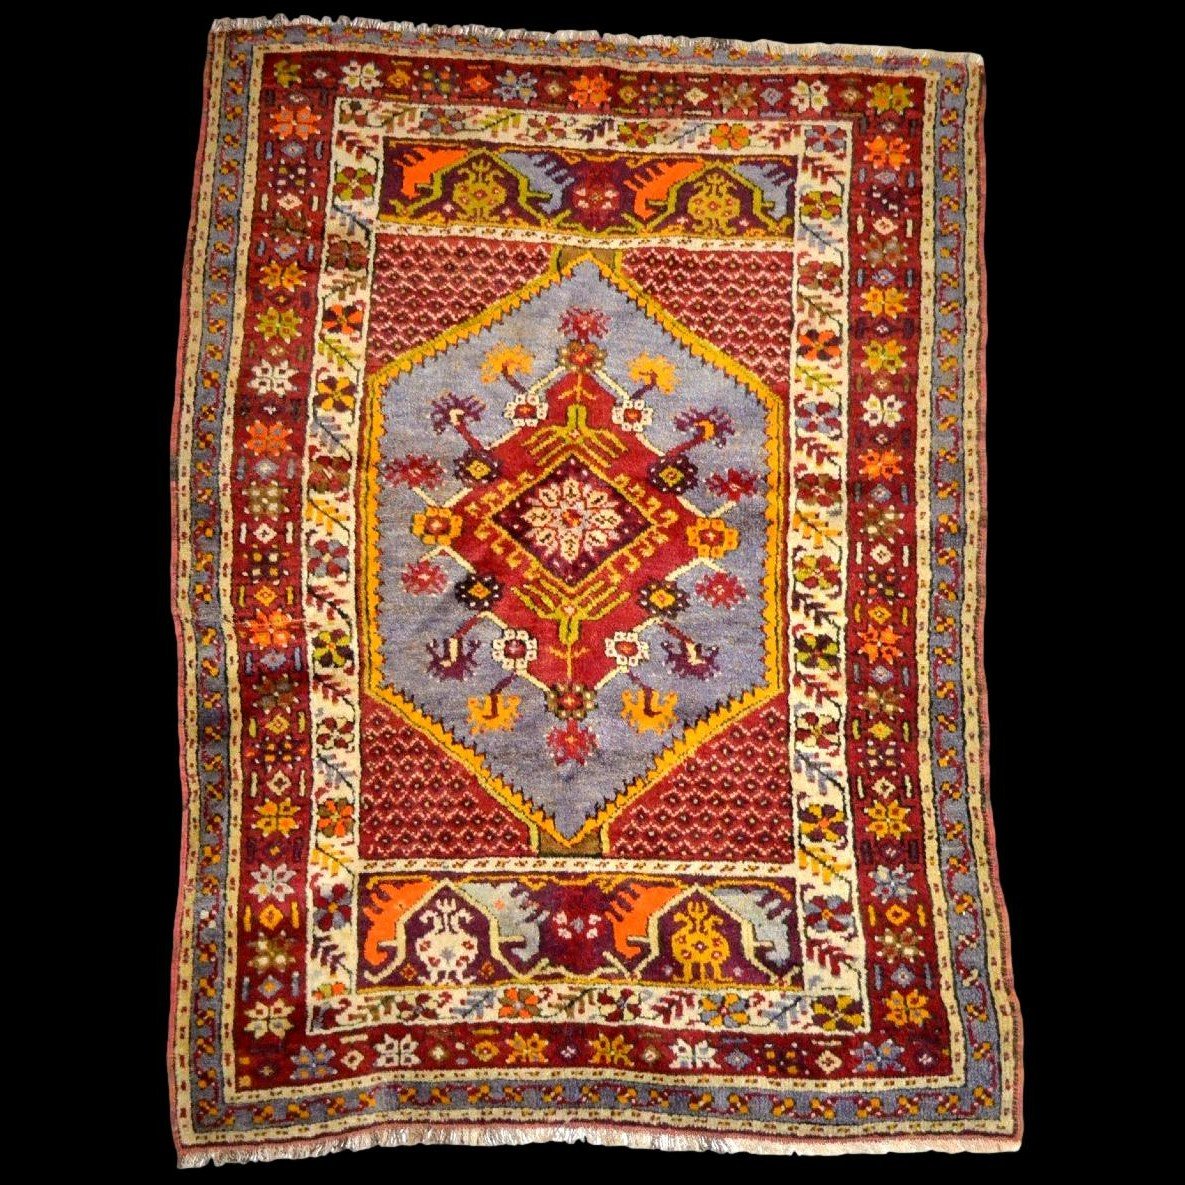 Anatolian, 103 Cm X 148 Cm, Hand-knotted Wool On Wool Around 1950 In Turkey, In Superb Condition